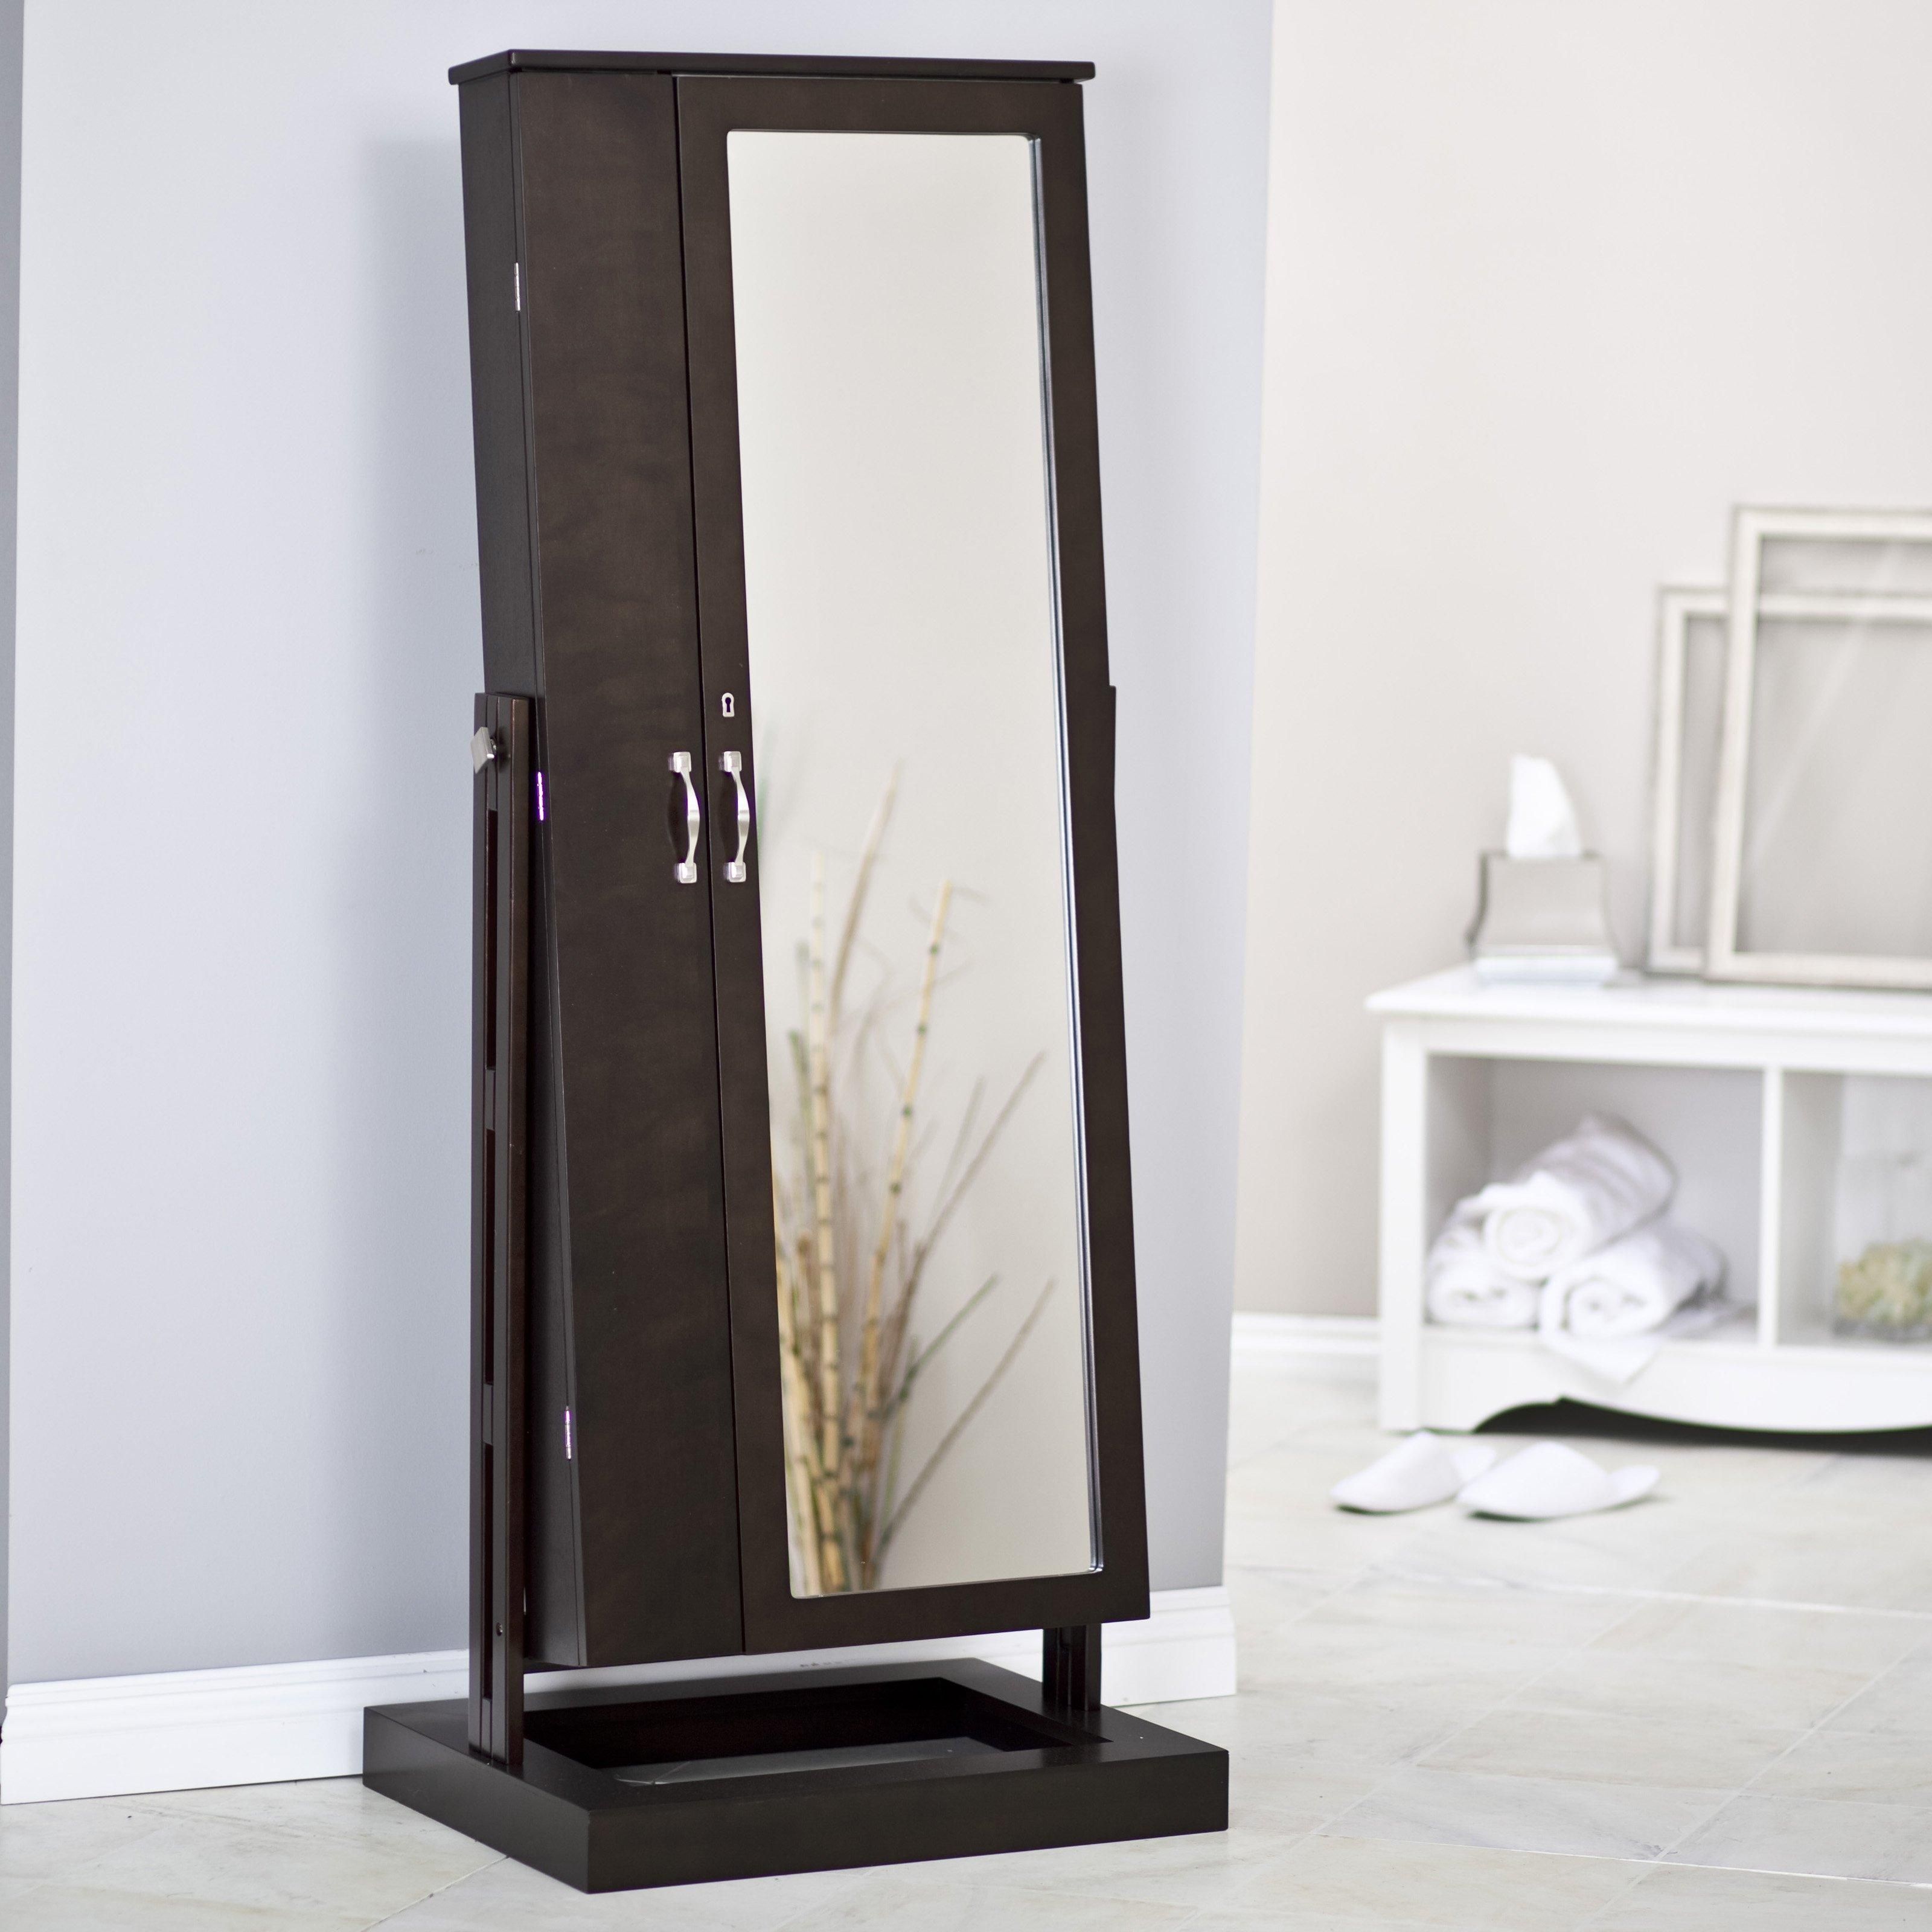 Furniture: Cheval Mirror | Cherry Full Length Mirror | Cheap With Regard To Cheap Stand Up Mirrors (View 9 of 20)